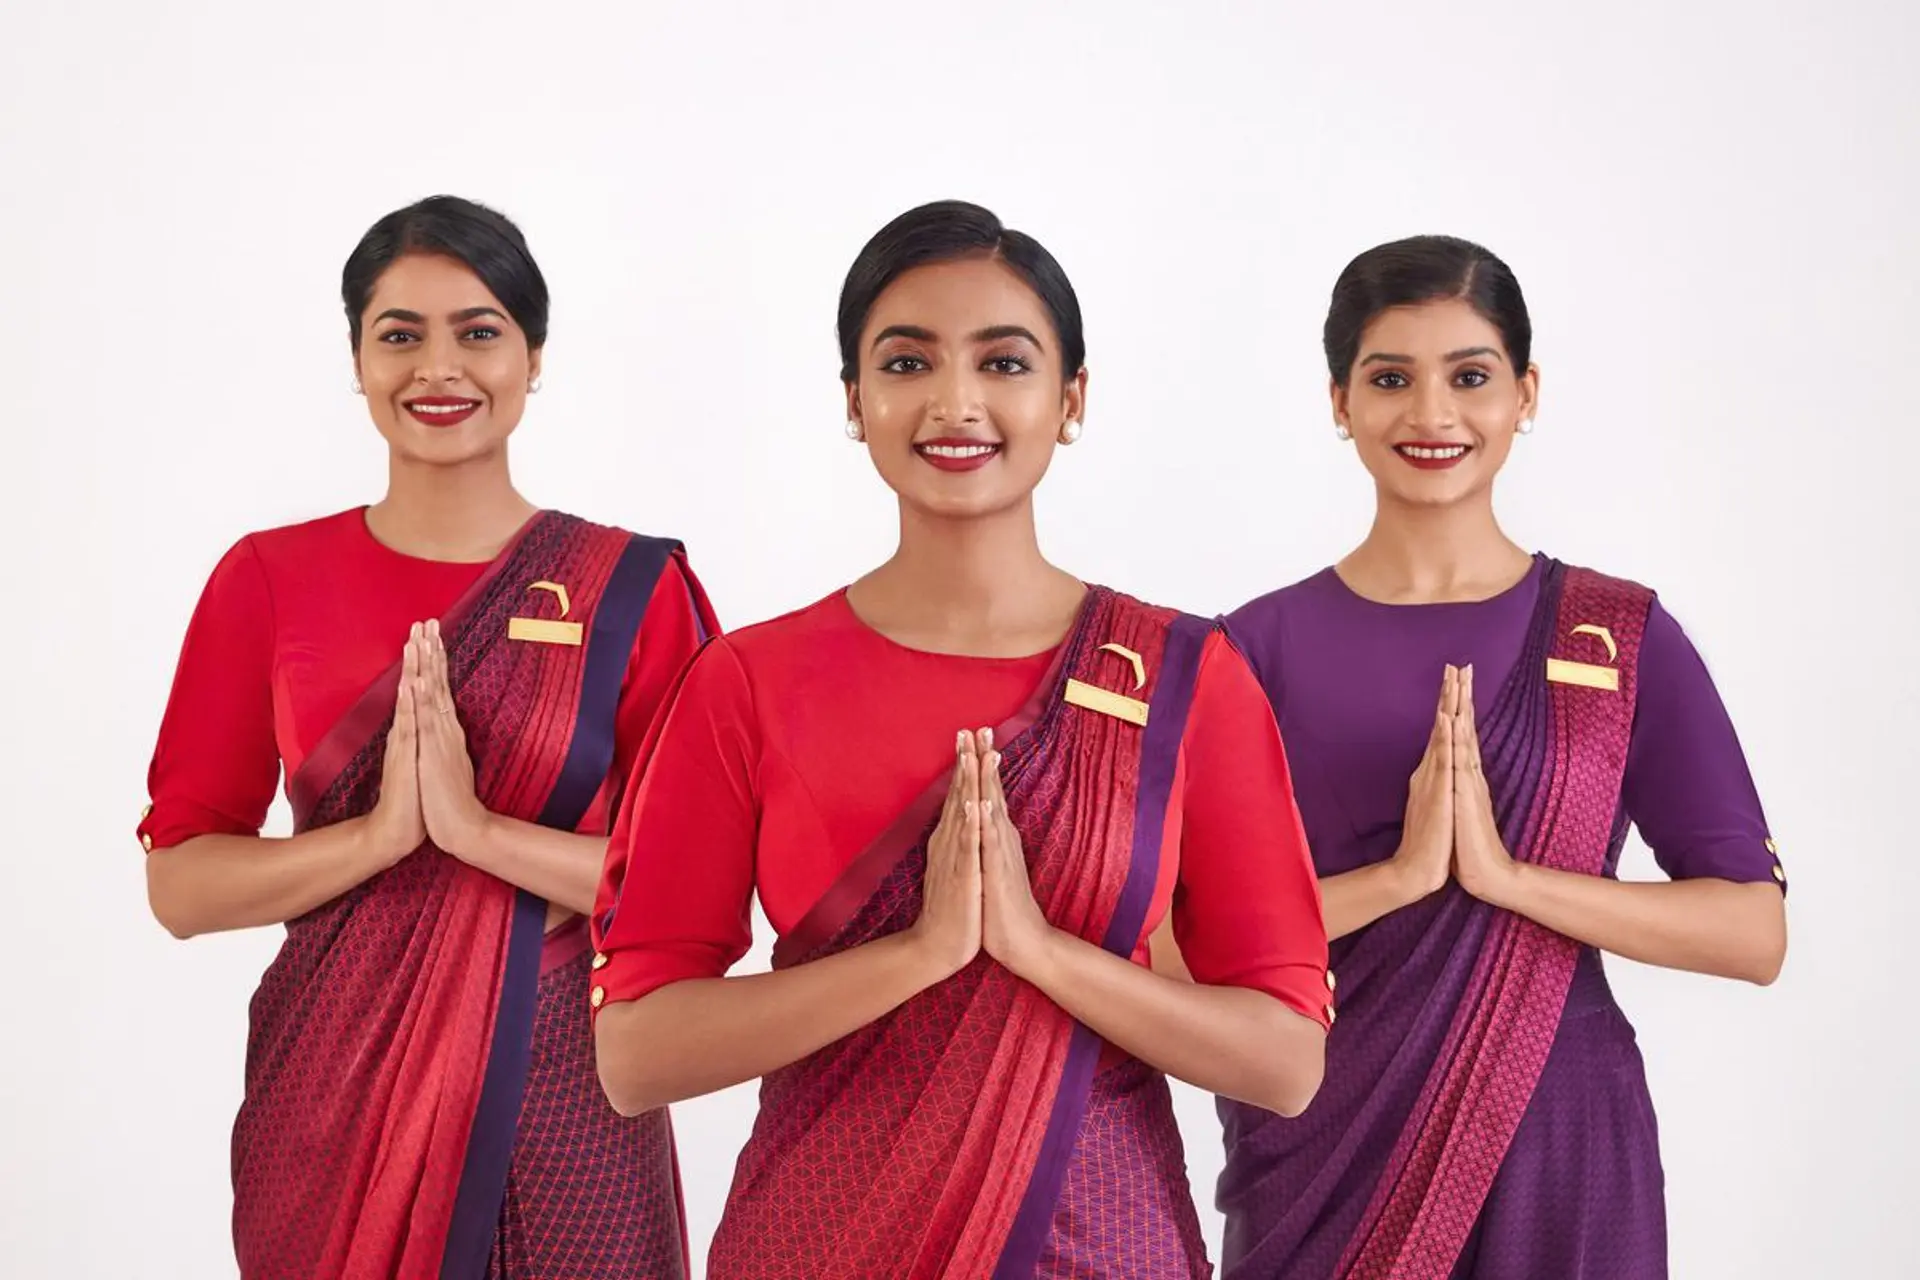 Airlines News - Air India flies to Dubai with new A350-900 